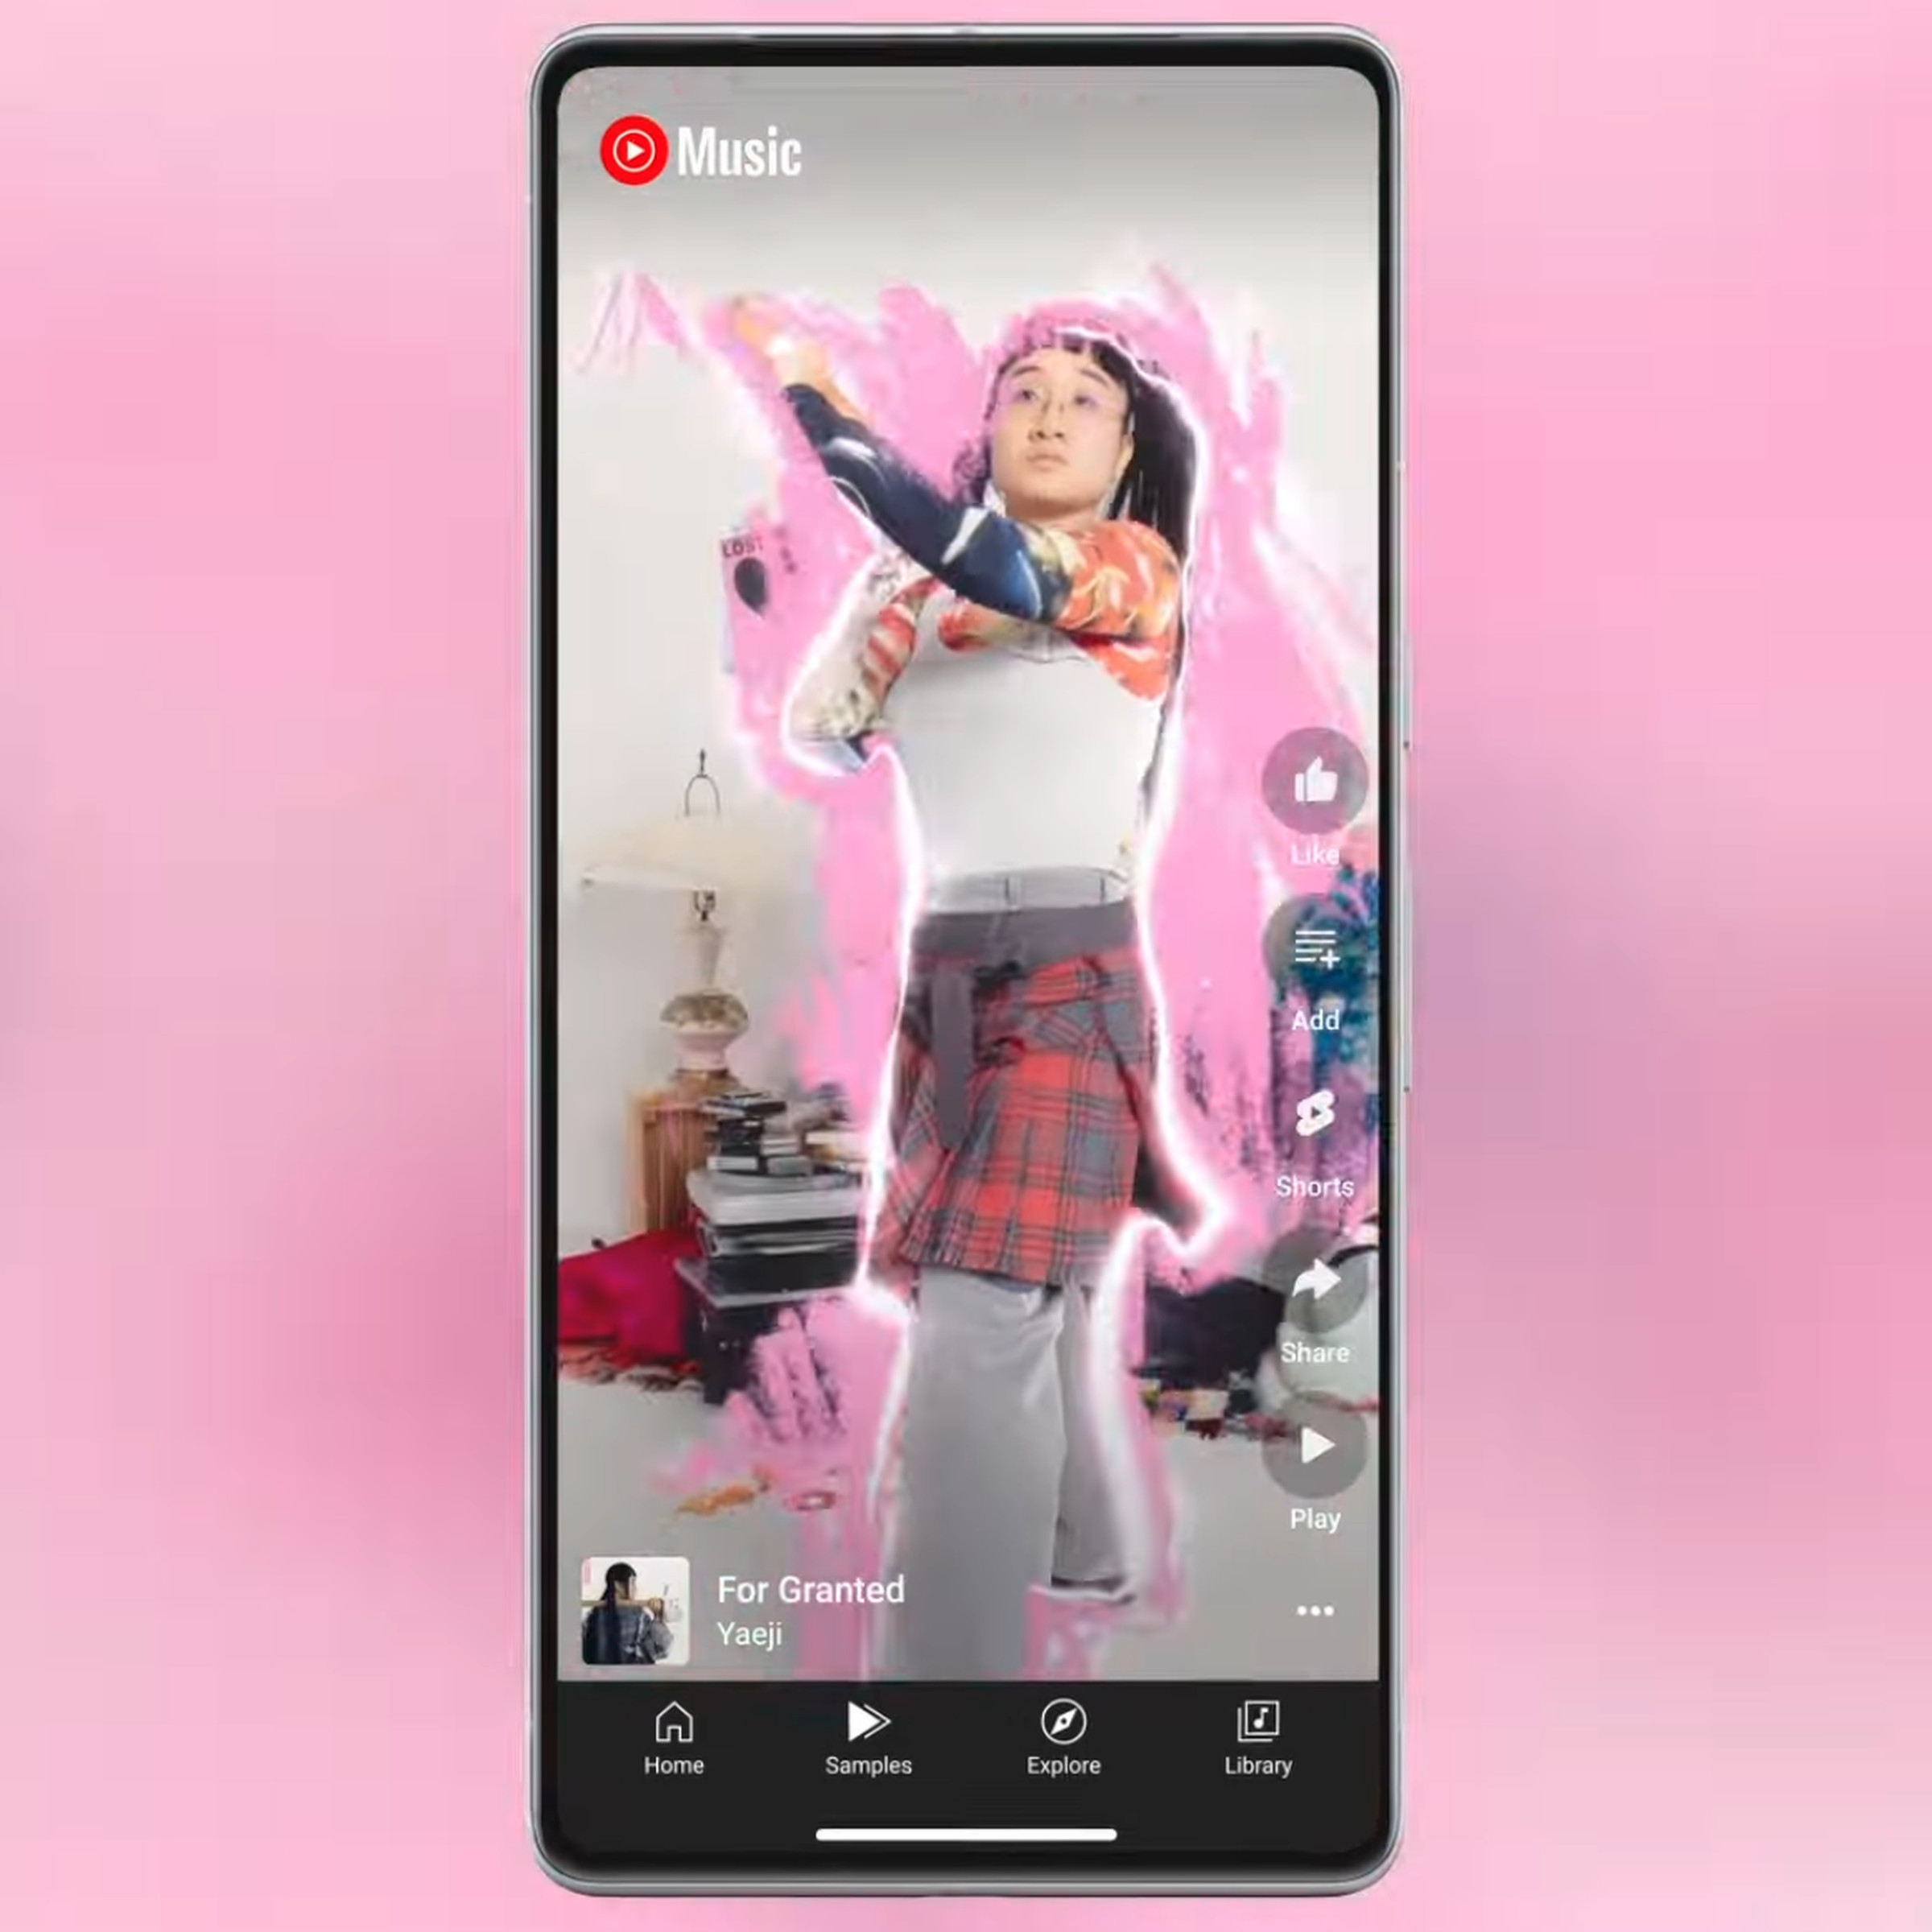 A screenshot of a music video playing in the YouTube Music app, on a pink background.